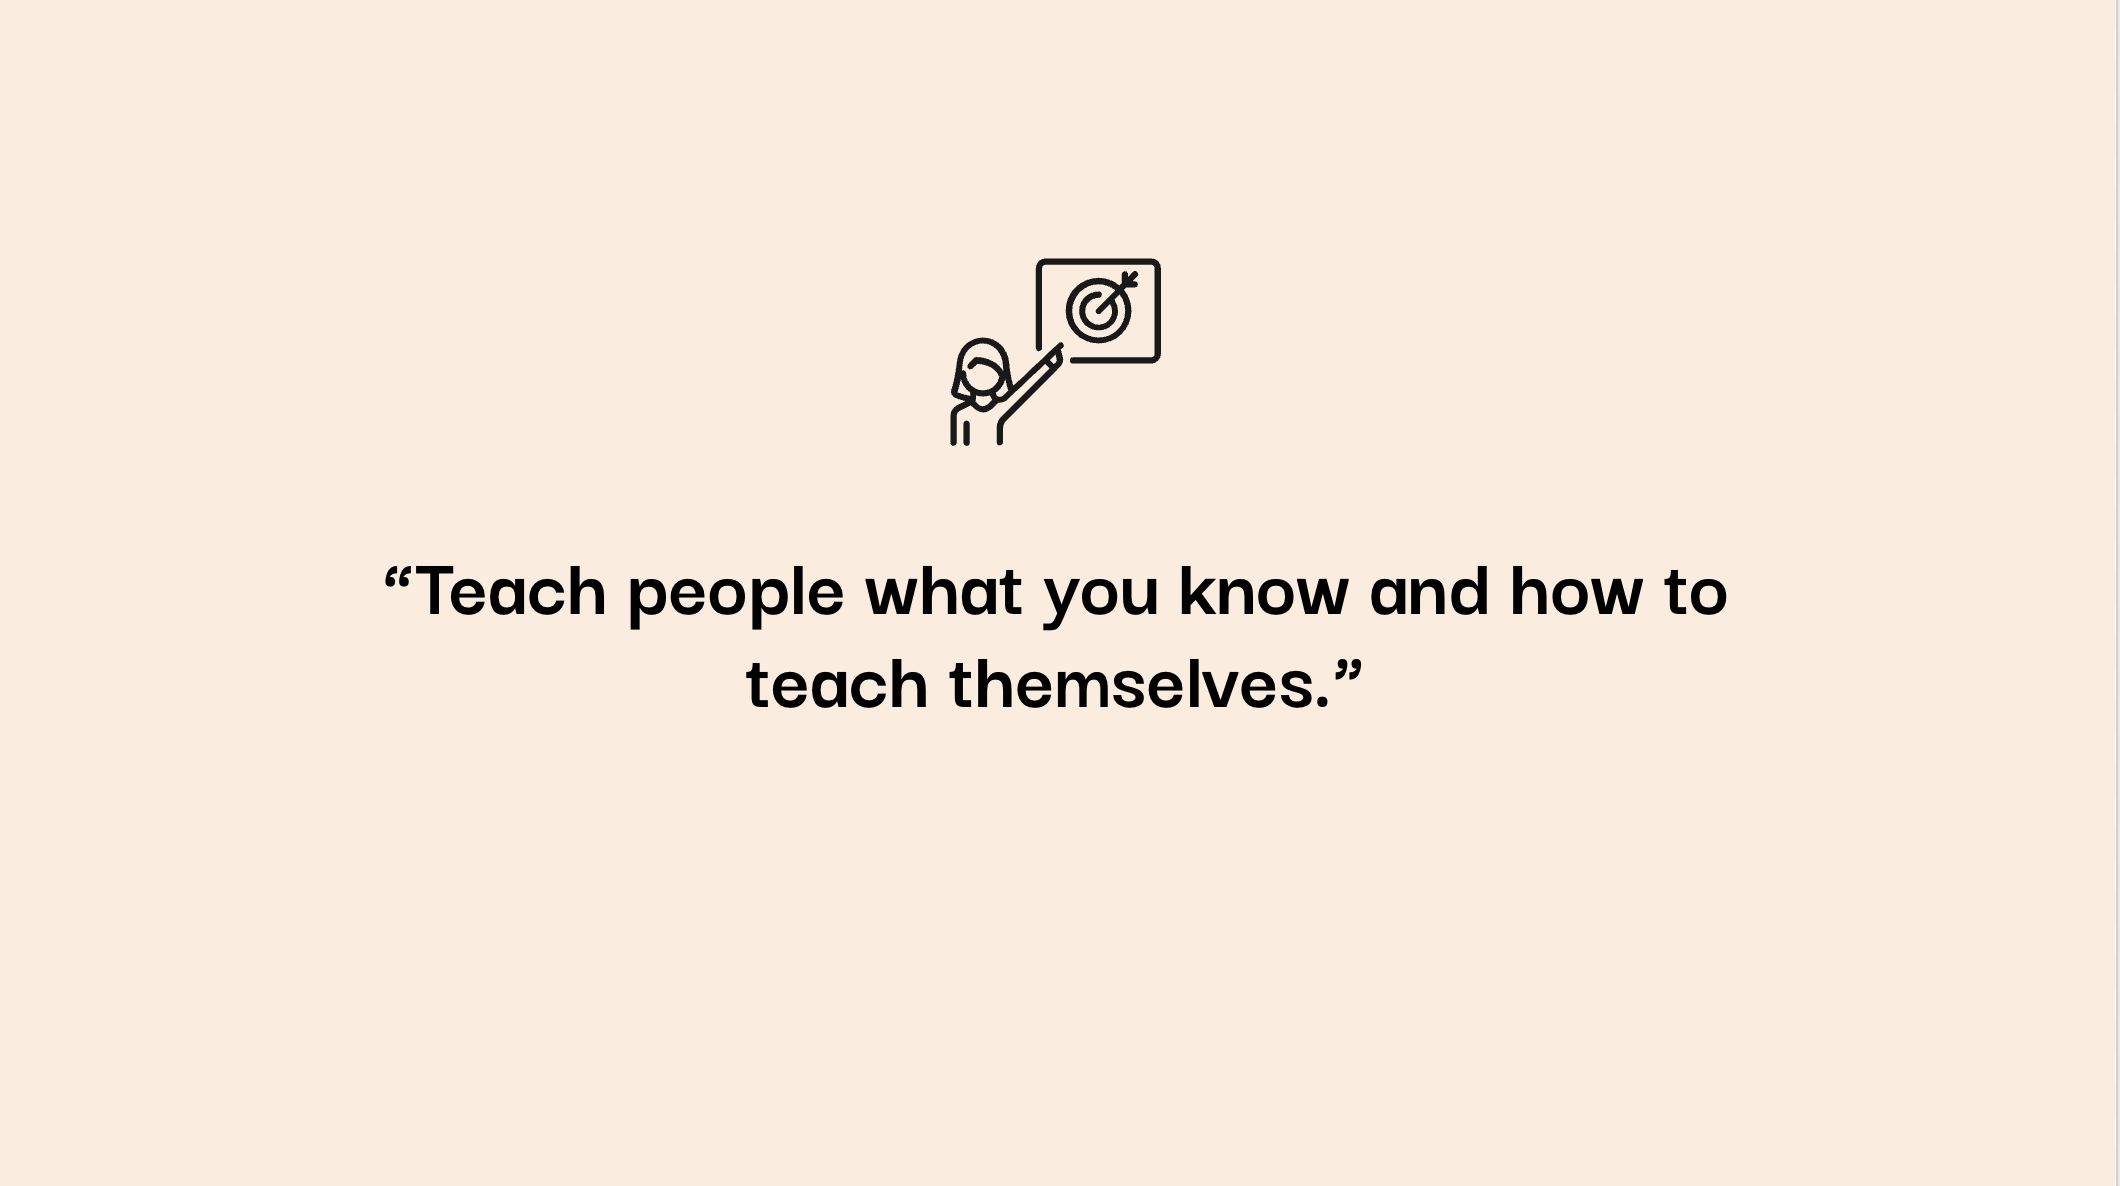 Teach what you know